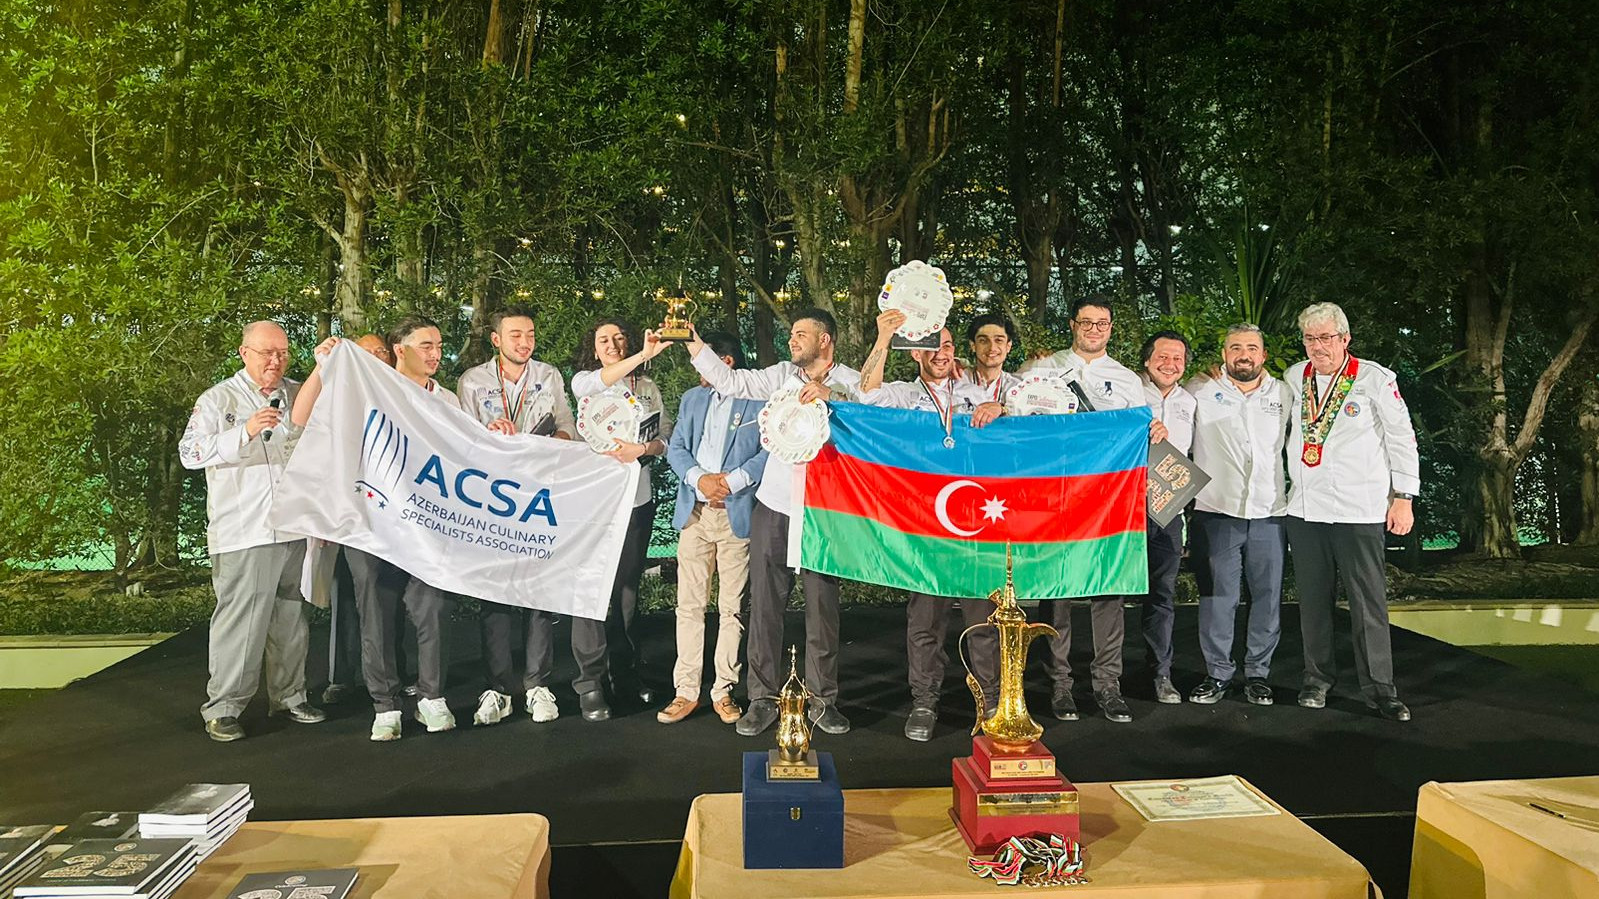 The National Culinary Team won silver and bronze medals at the international competition held in the UAE